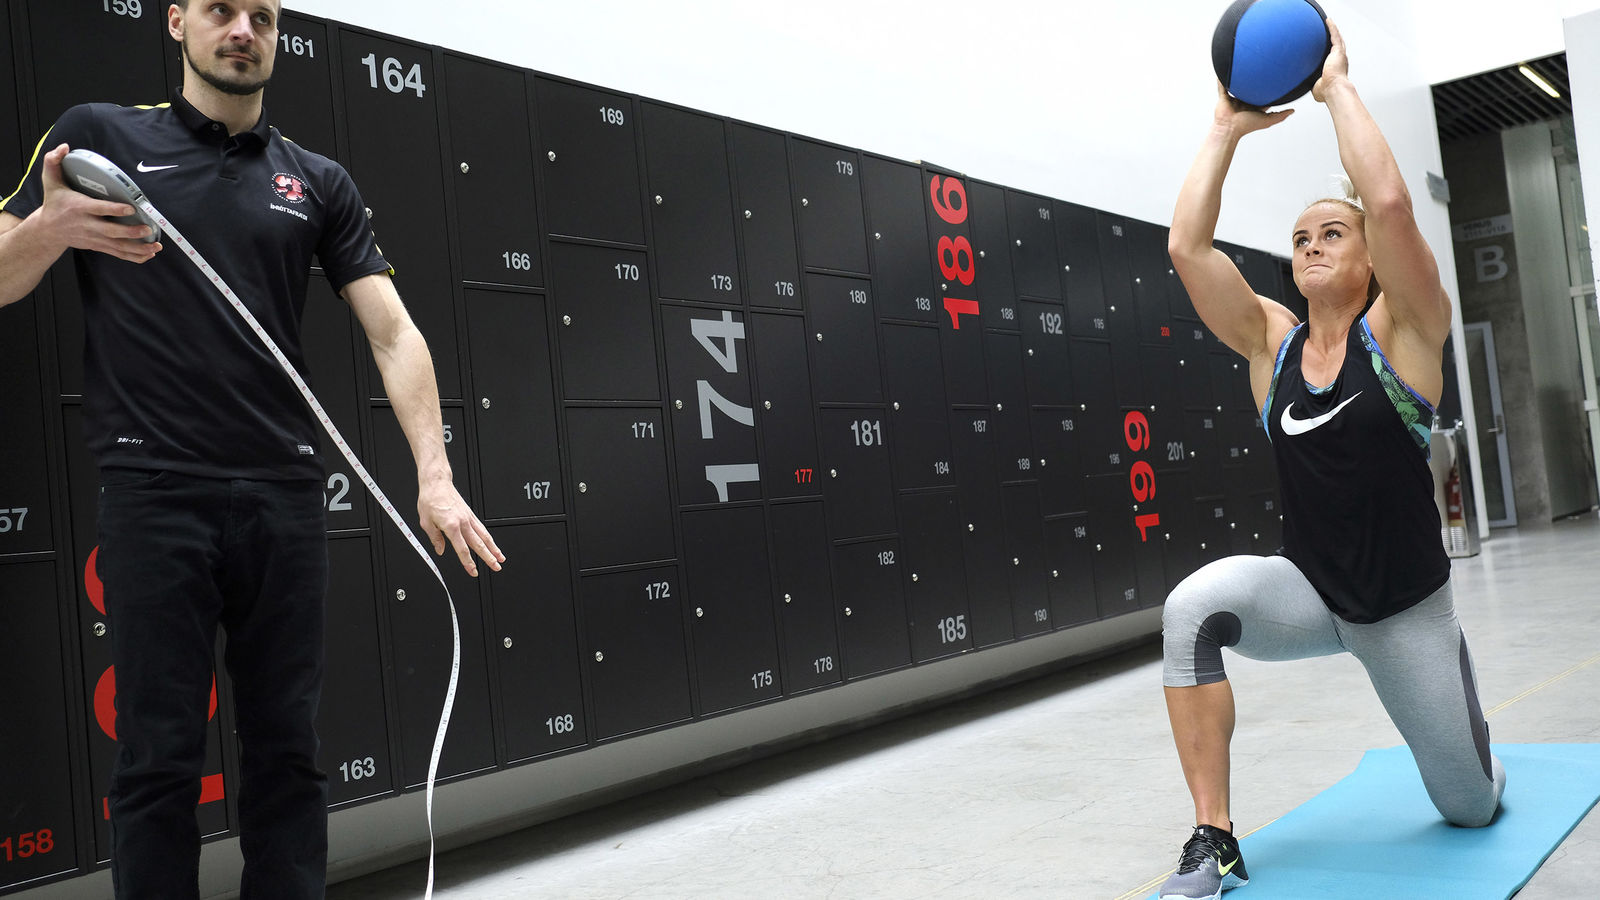 A woman prepares to throw a ball while a man measures the distance